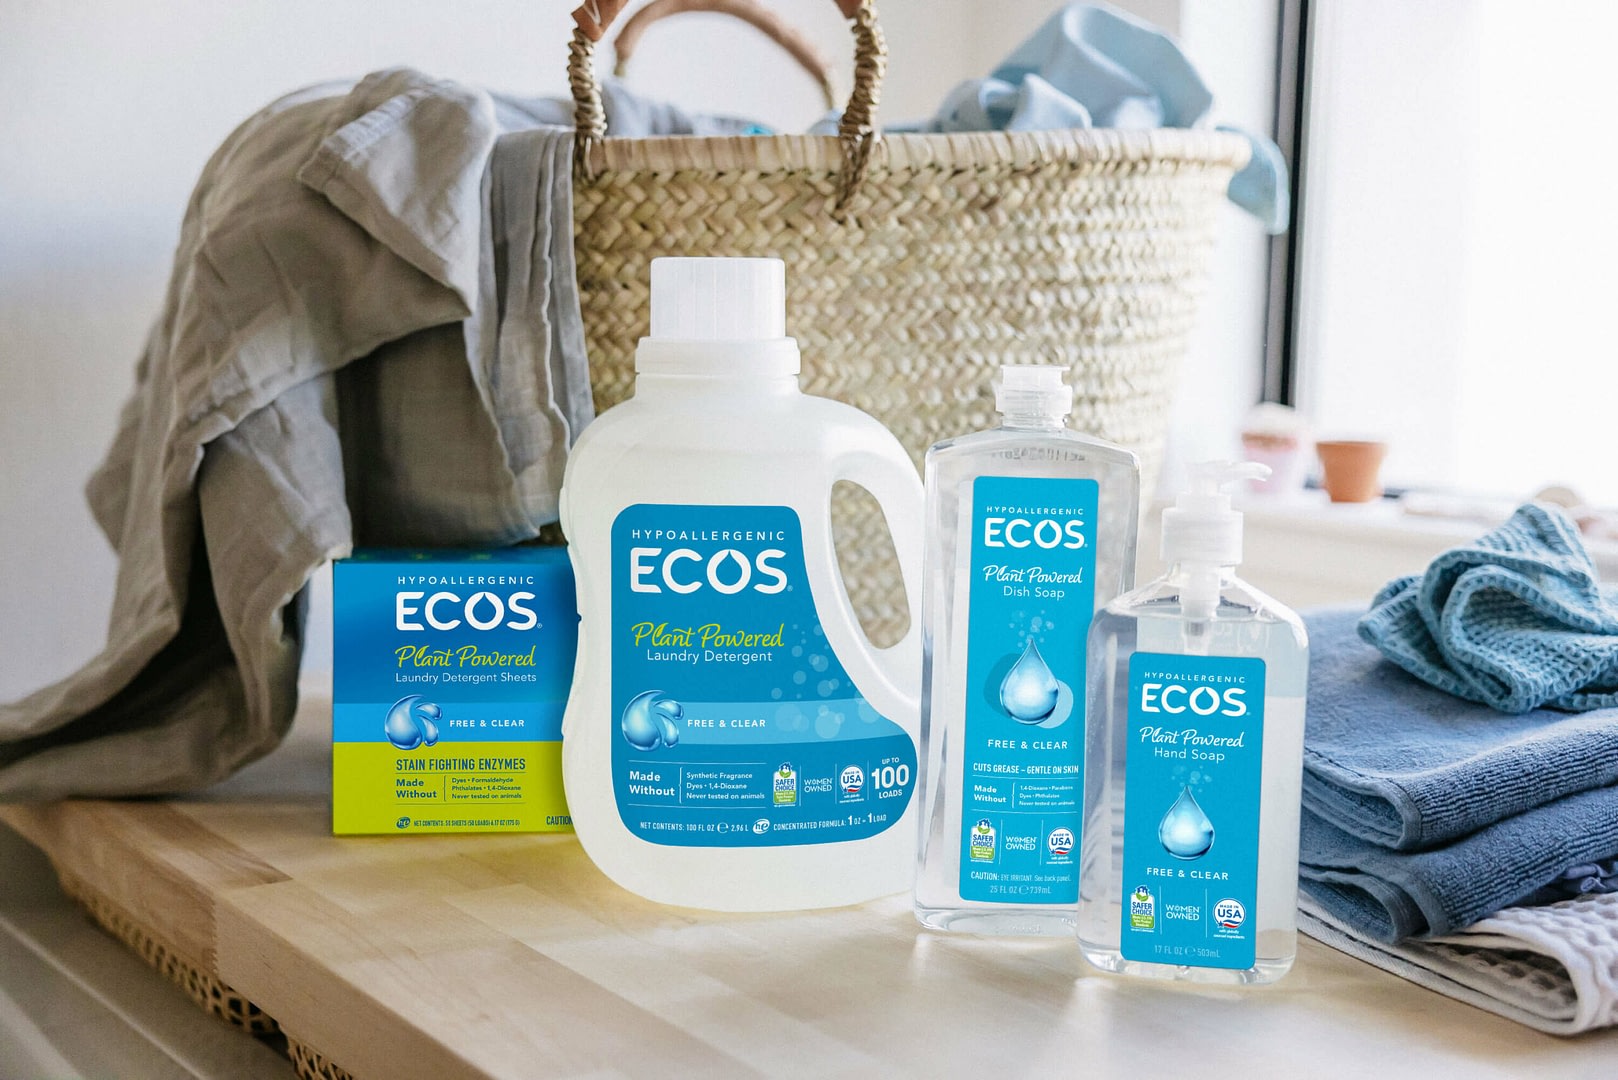 Eco-Conscious Stainless Steel Polish & Cleaner - ECOS®